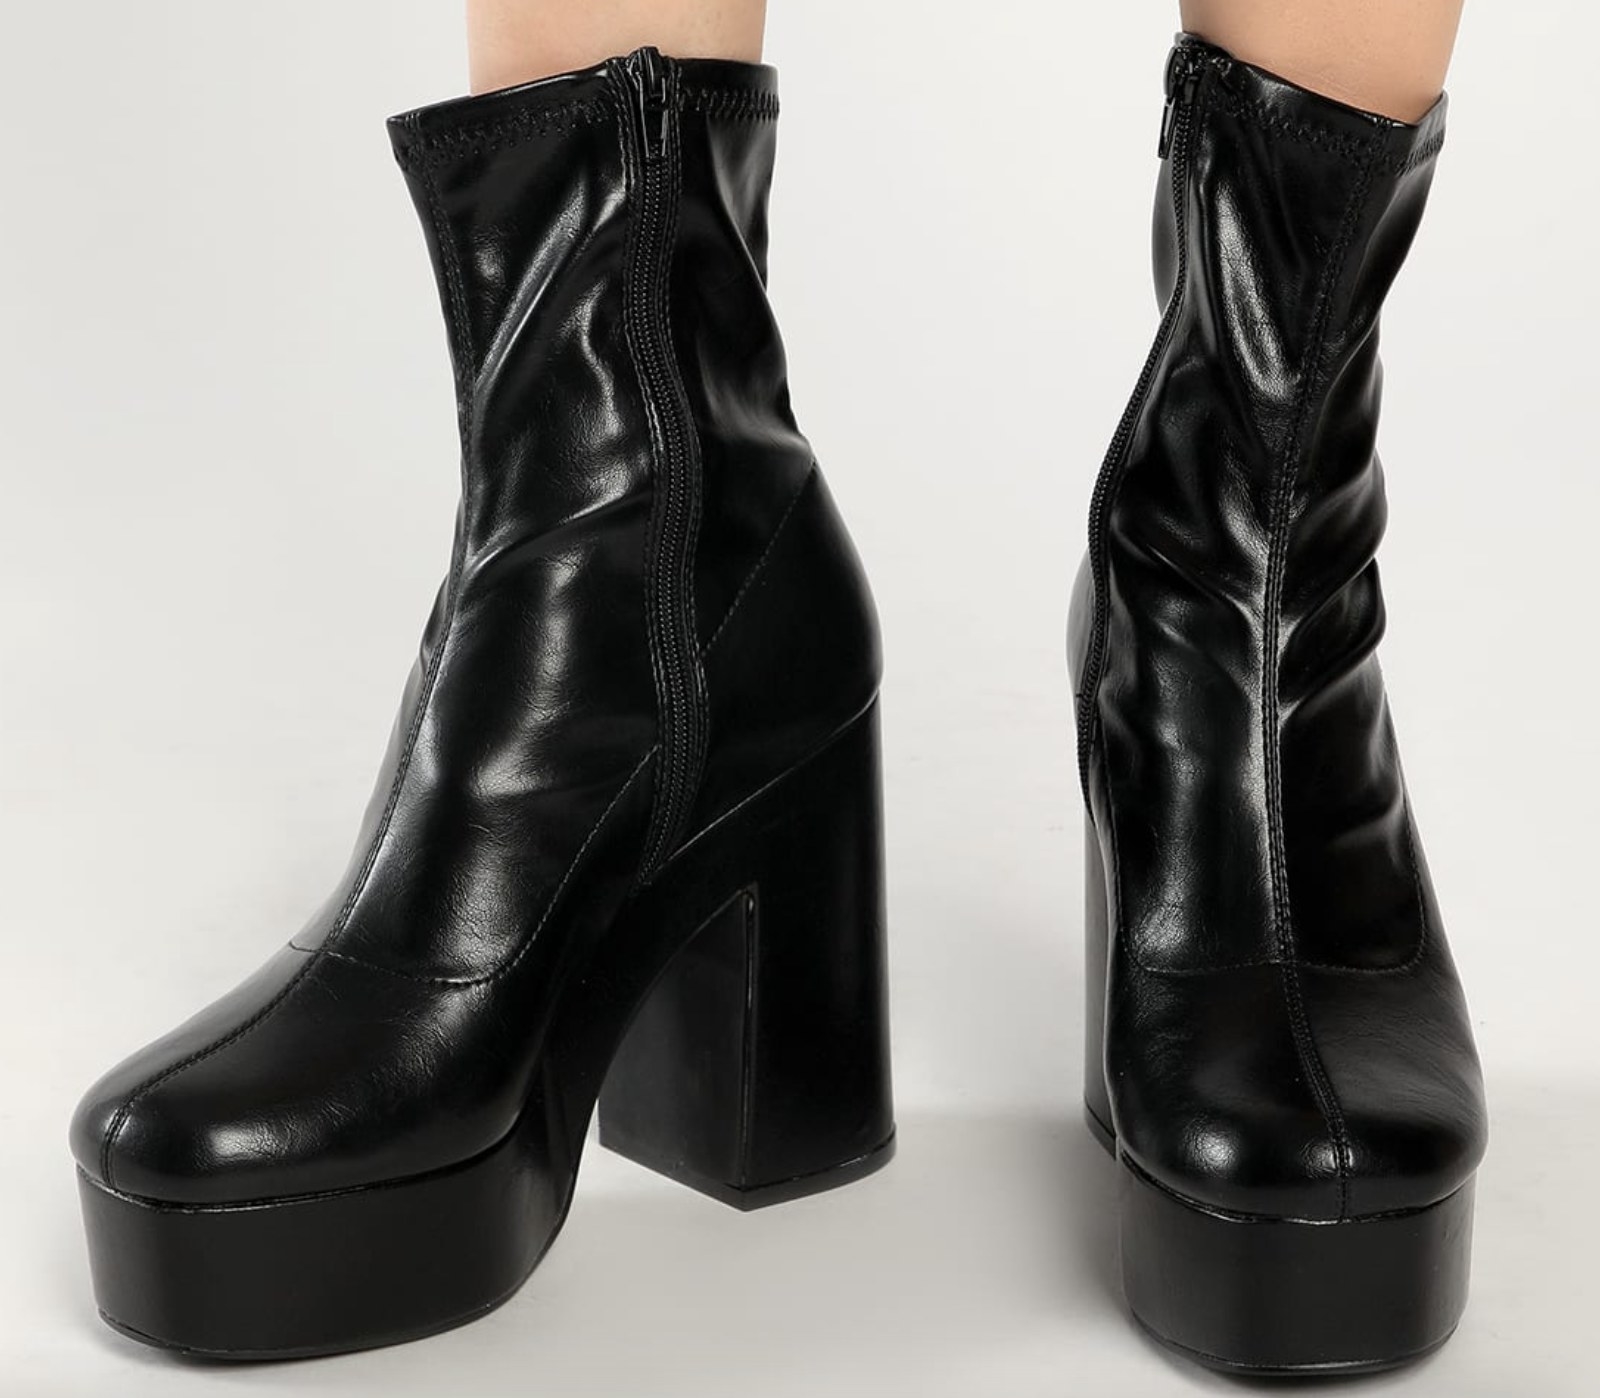 The shimmery black leather boots are shown in a close-up shot